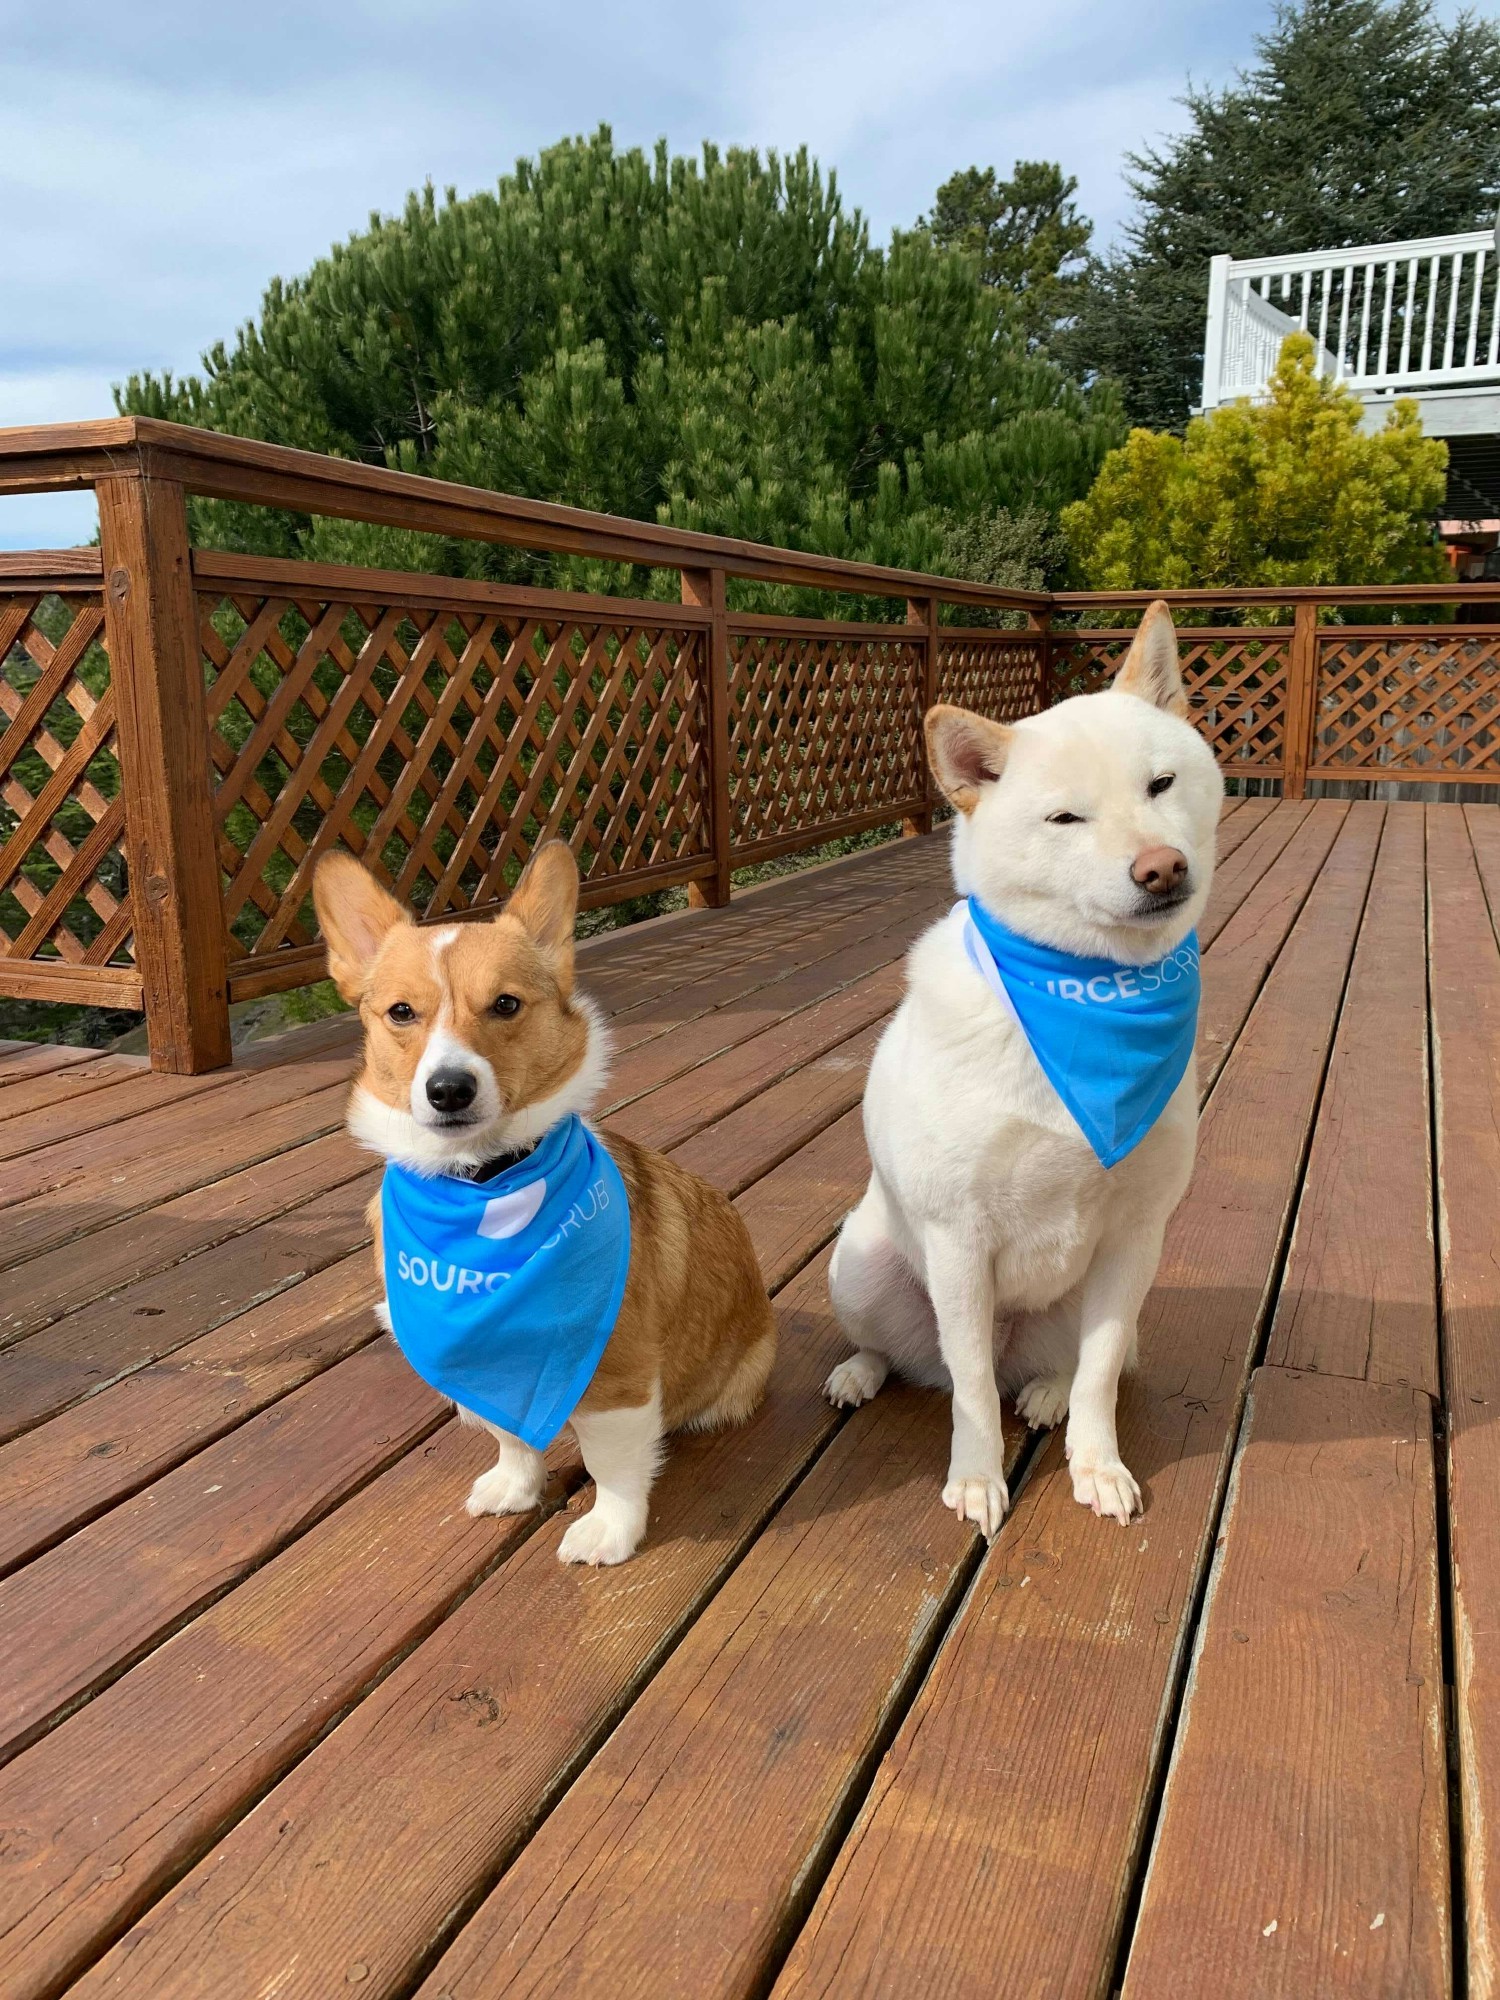 Popcorn and Ez showing off their new swag.